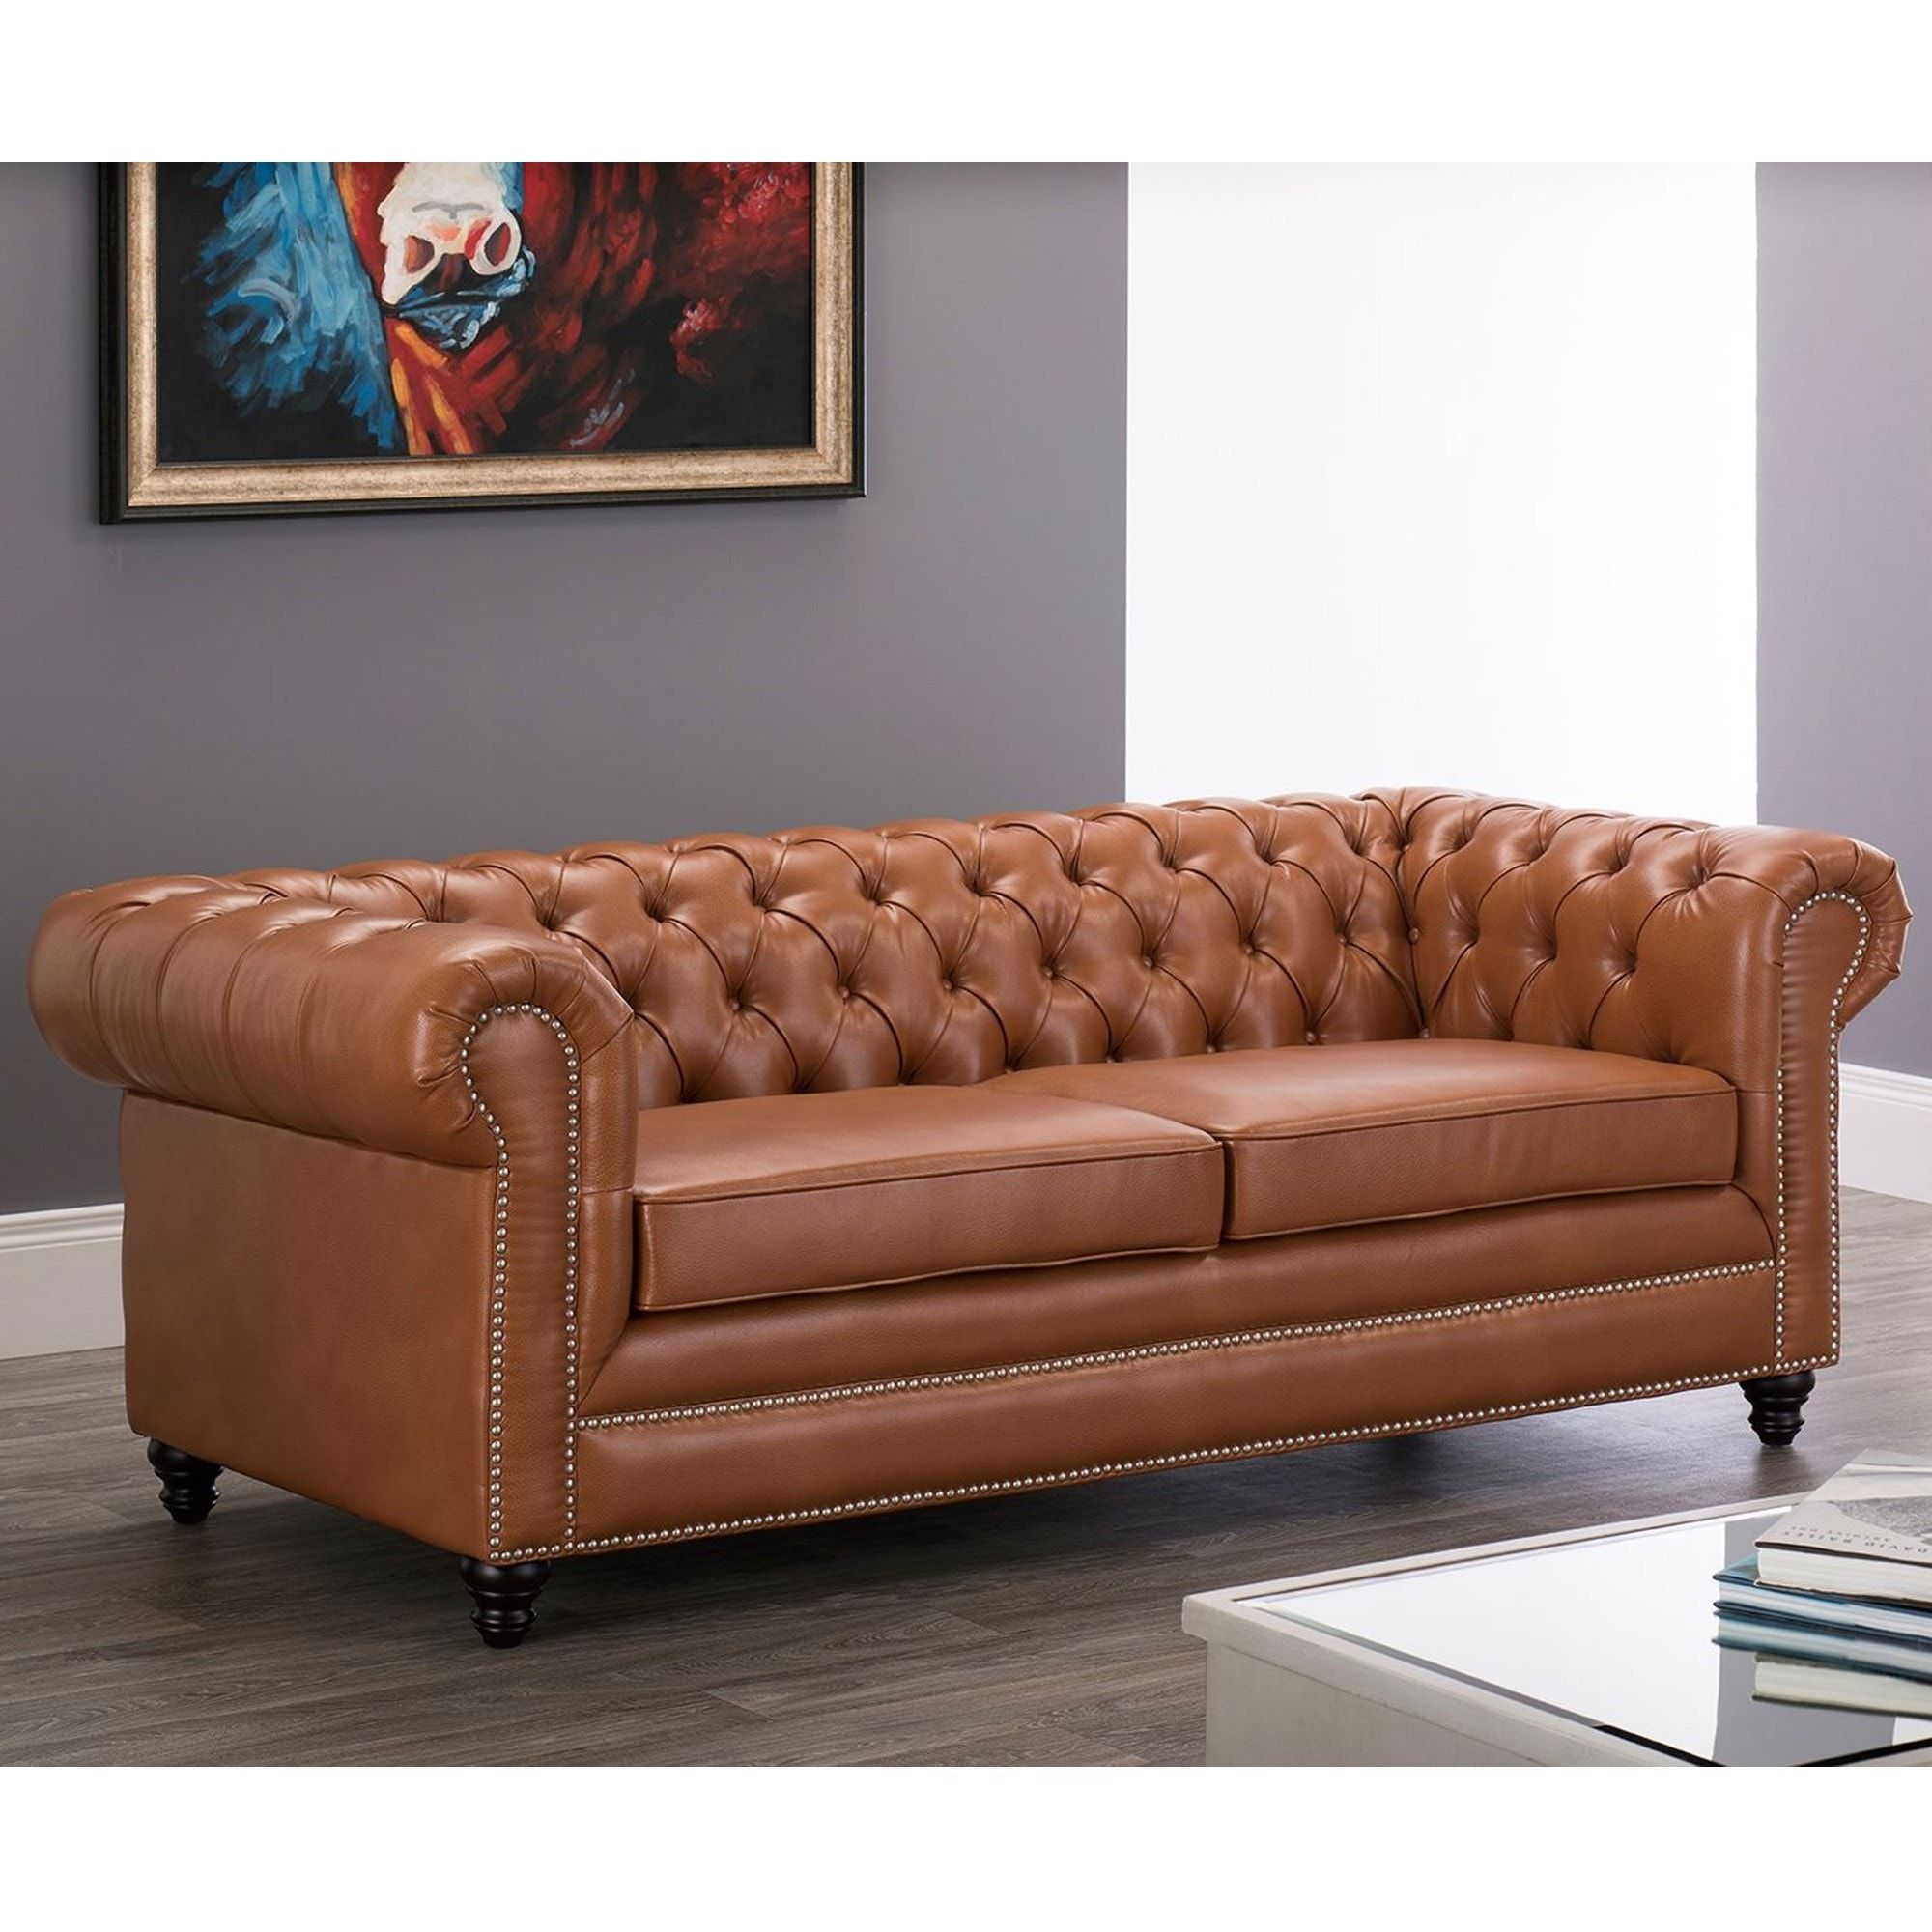 Faux Leather Chesterfield 3 Seater Sofa Tan | Tan Chesterfield Sofa Throughout Traditional 3 Seater Faux Leather Sofas (View 9 of 15)